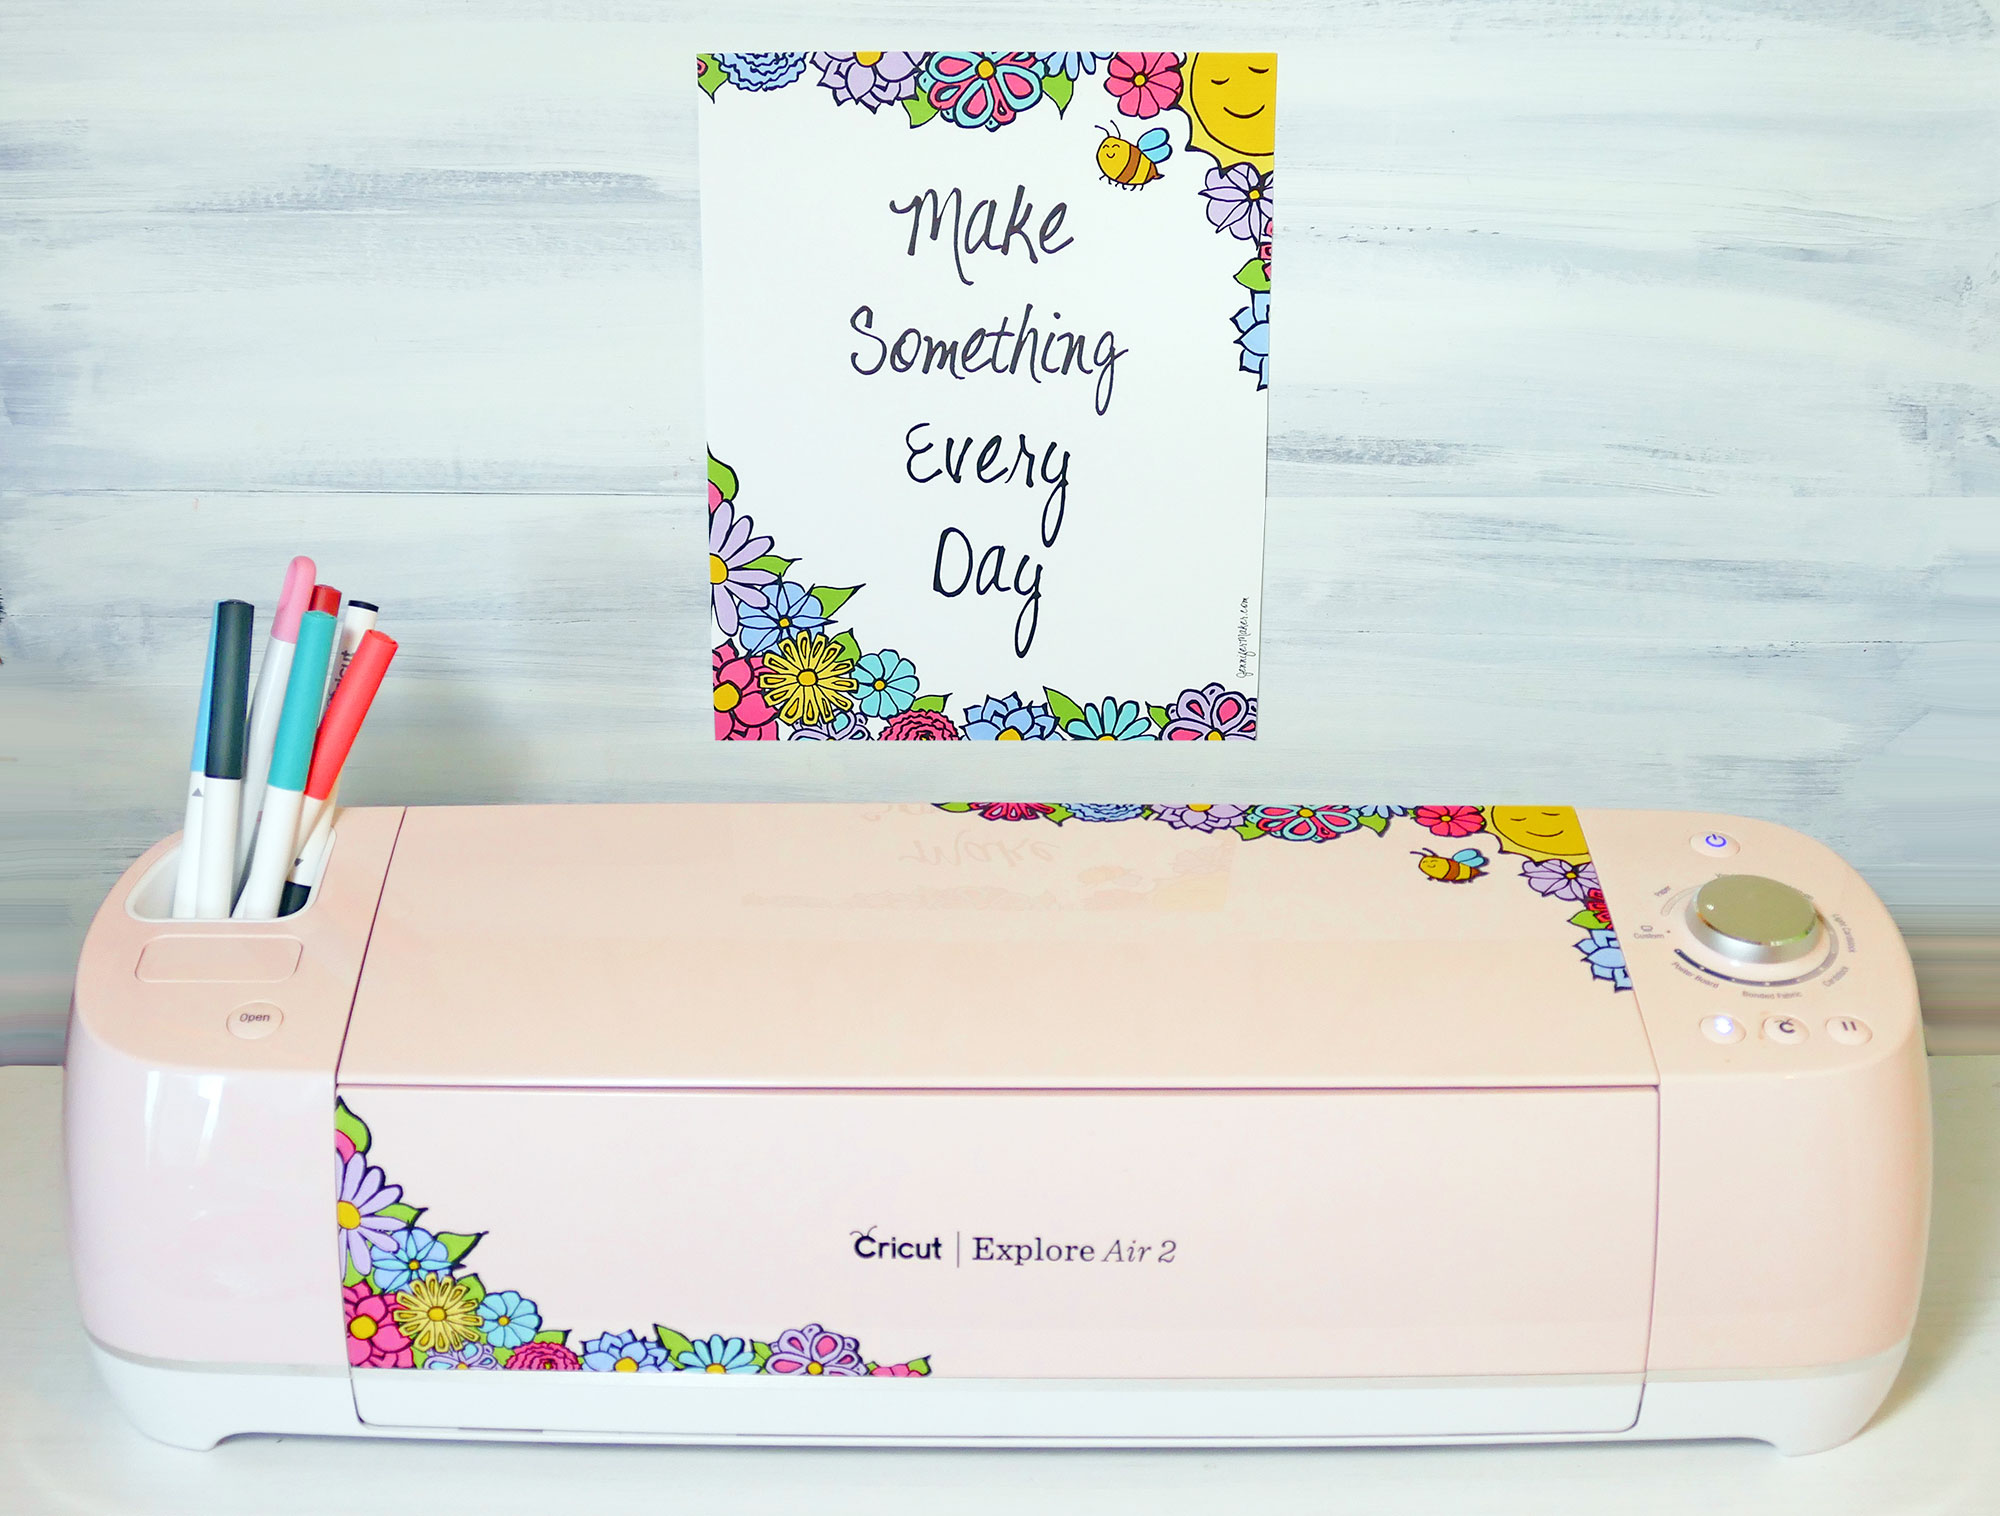 Gallery of Decorated Cricut Air 2 Machines.